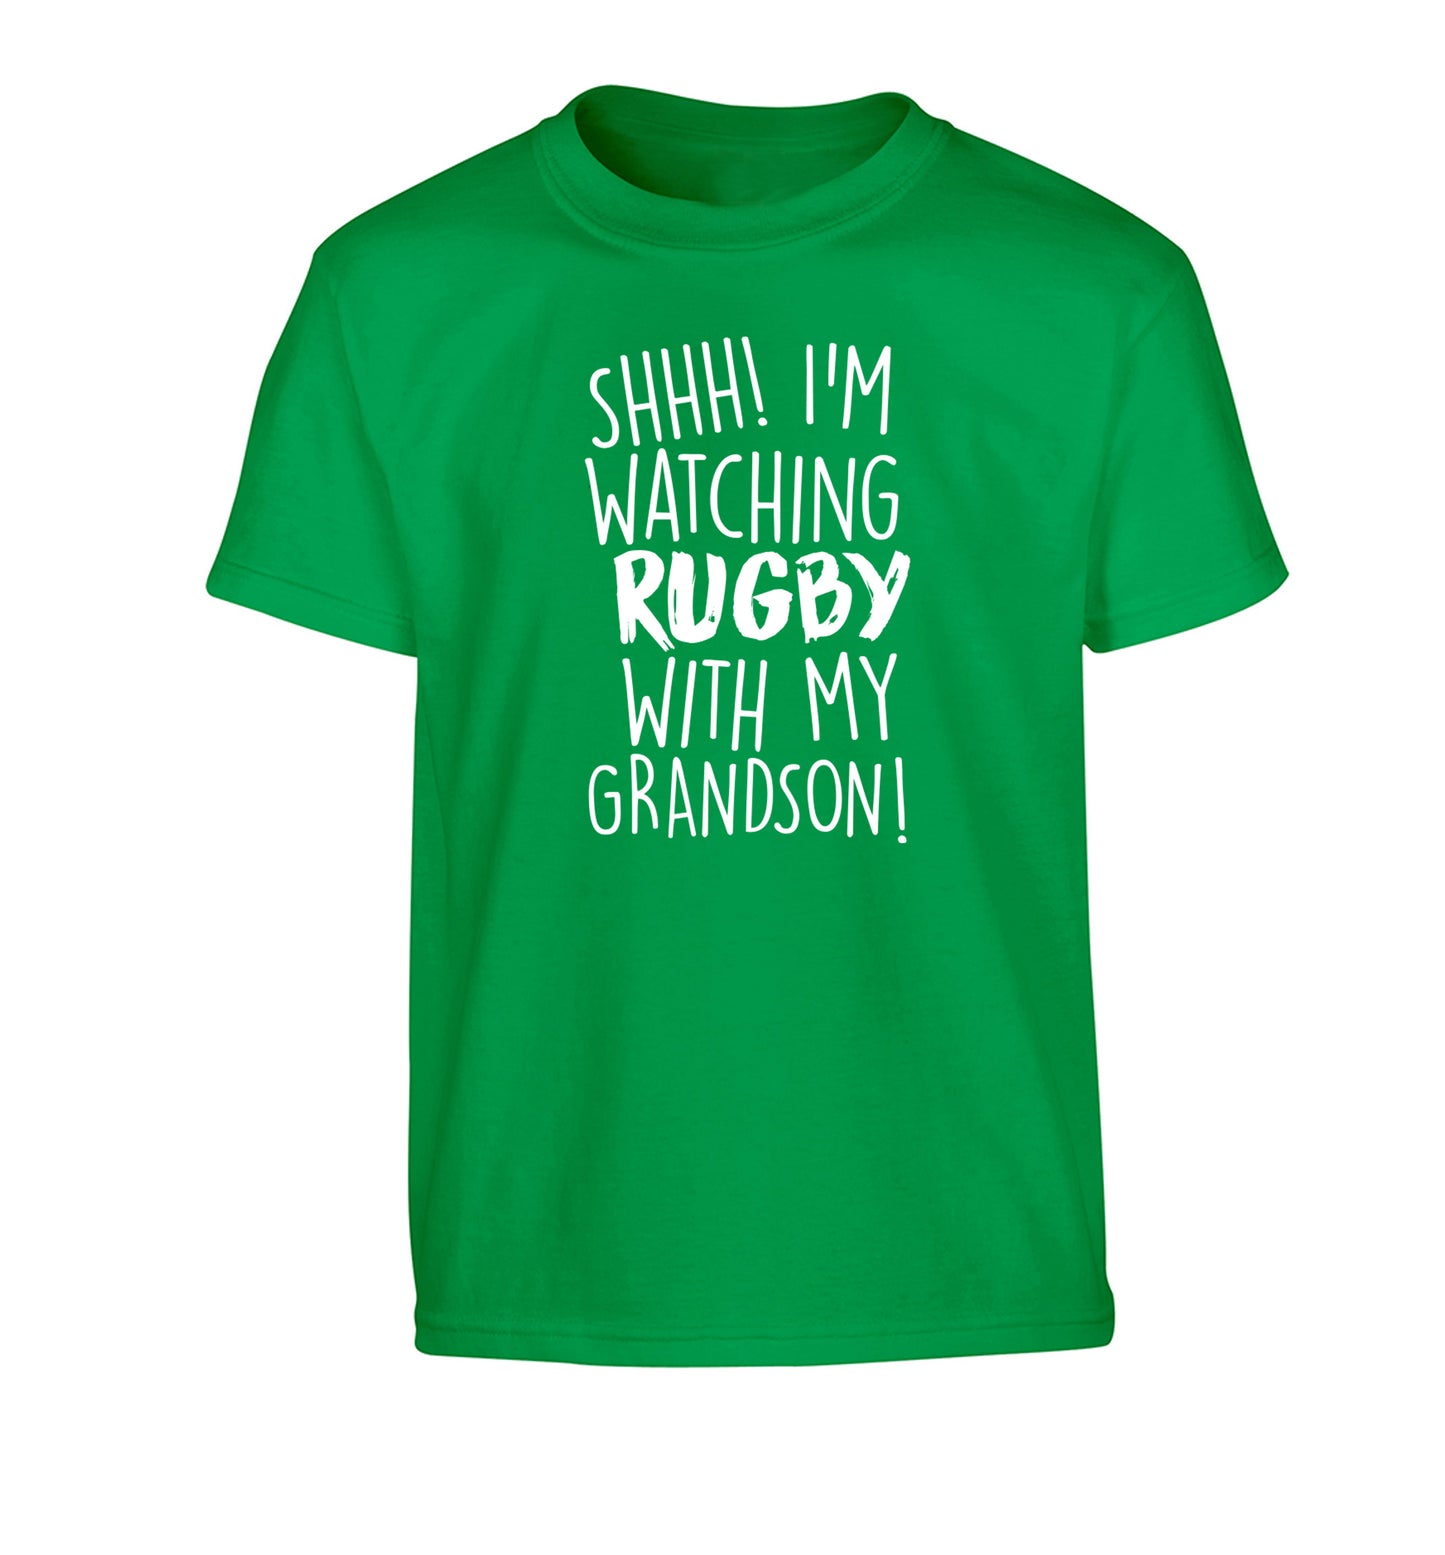 Shh I'm watching rugby with my grandson Children's green Tshirt 12-13 Years